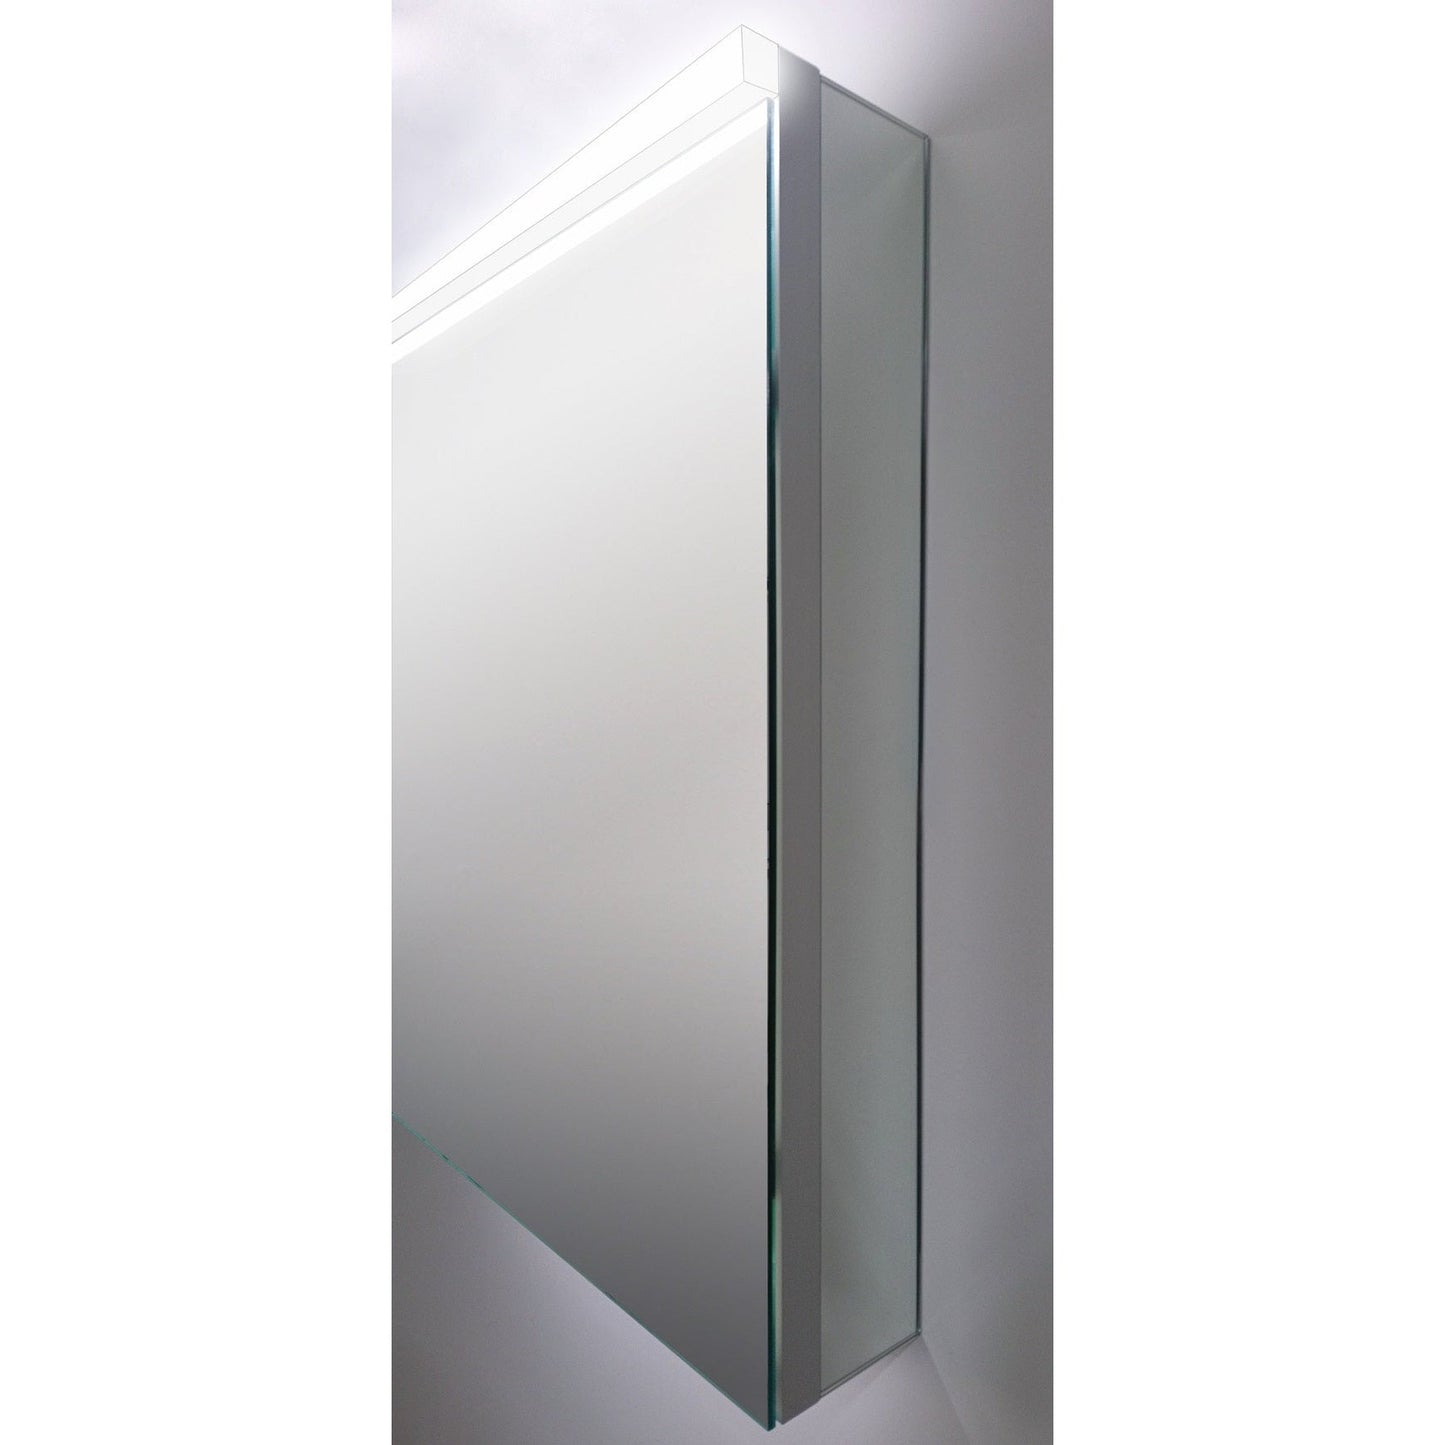 Sidler Xamo 59" x 30" 3000K 3 Mirror Doors Medicine Cabinet With Built-in GFCI outlet and Night Light Function